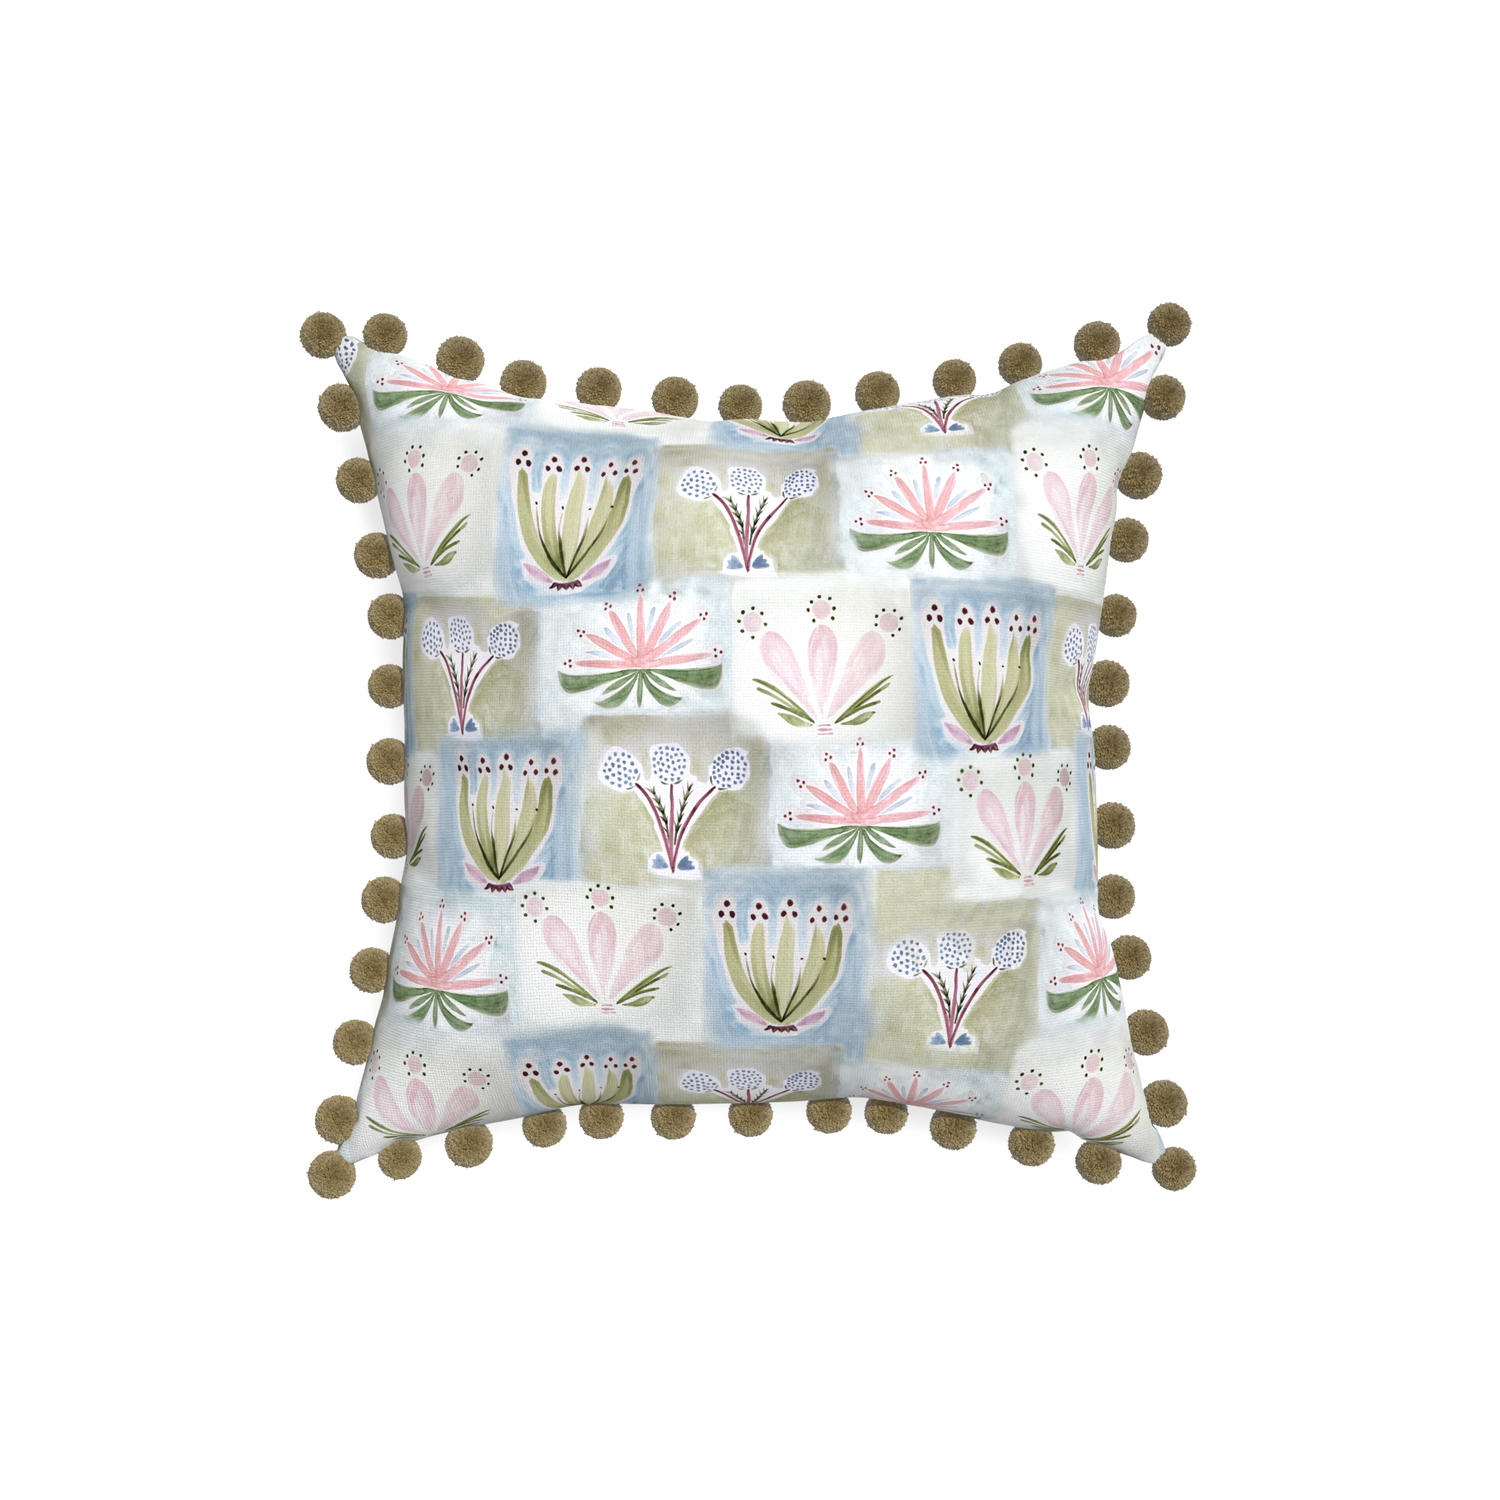 18-square harper custom hand-painted floralpillow with olive pom pom on white background